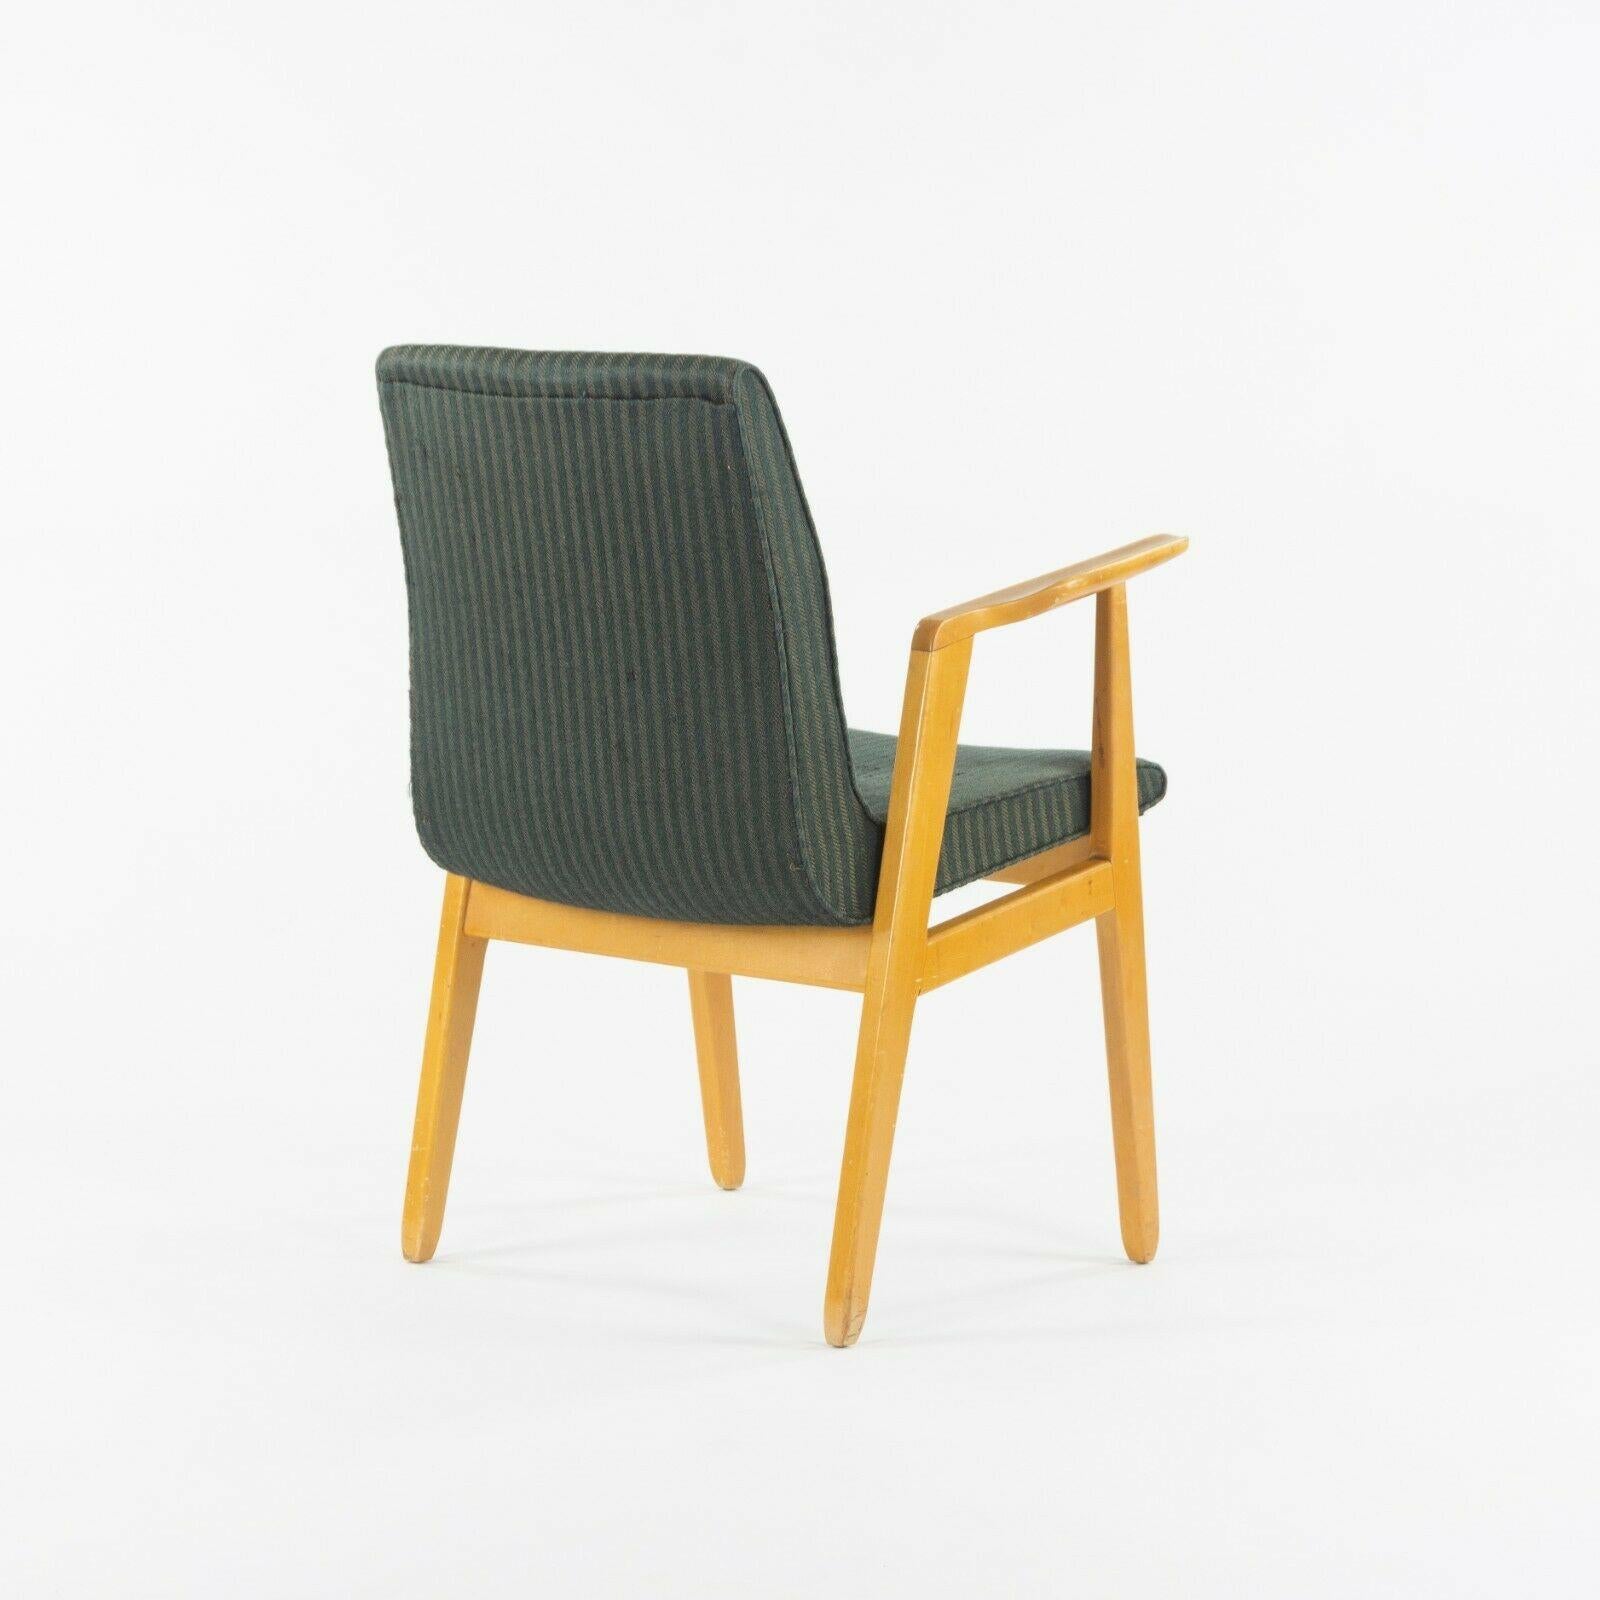 C. 1946 Rare Ralph Rapson for Knoll Associates Dining / Side Arm Chair in Birch In Good Condition For Sale In Philadelphia, PA